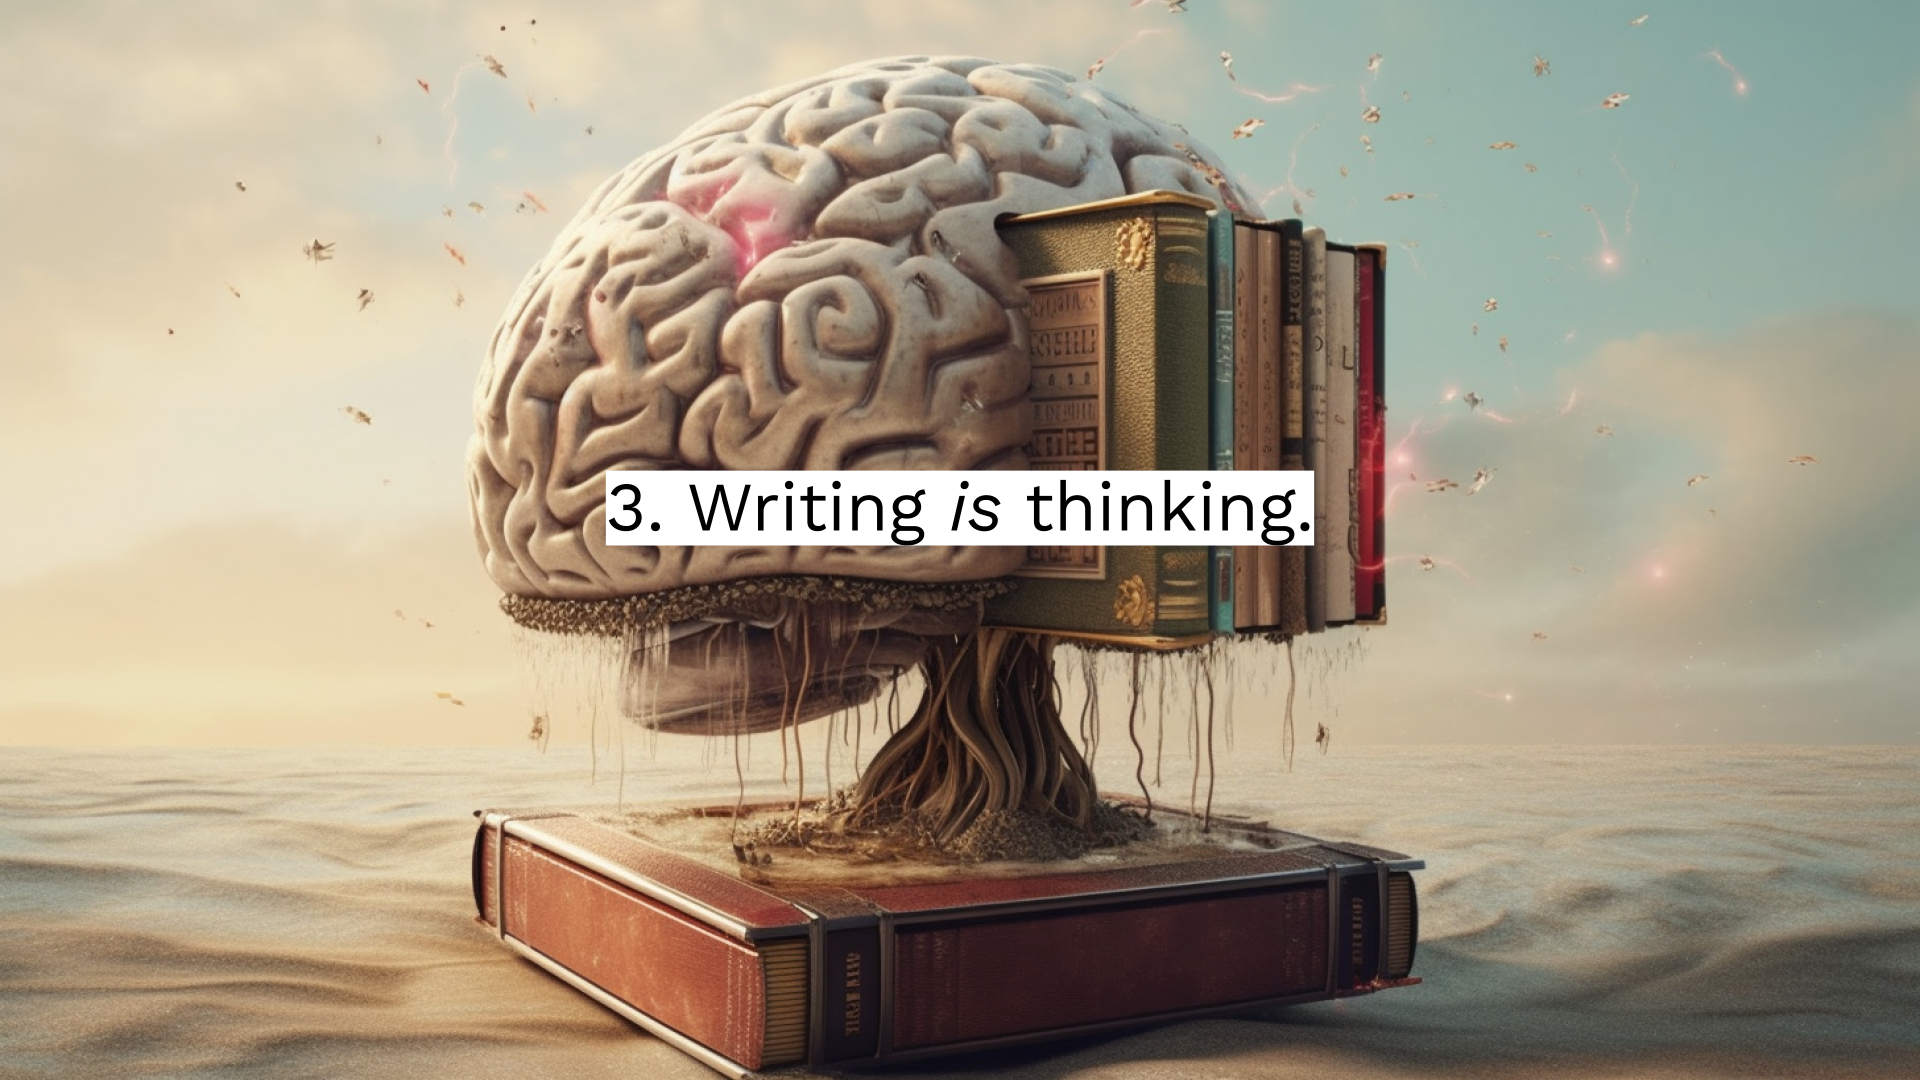 AI-human collaboration has the power to change how humans think. Image: A digital artwork of a brain with treelike characteristics, embedded with stacks of books, superimposed with the phrase: "Writing is thinking." | August Public